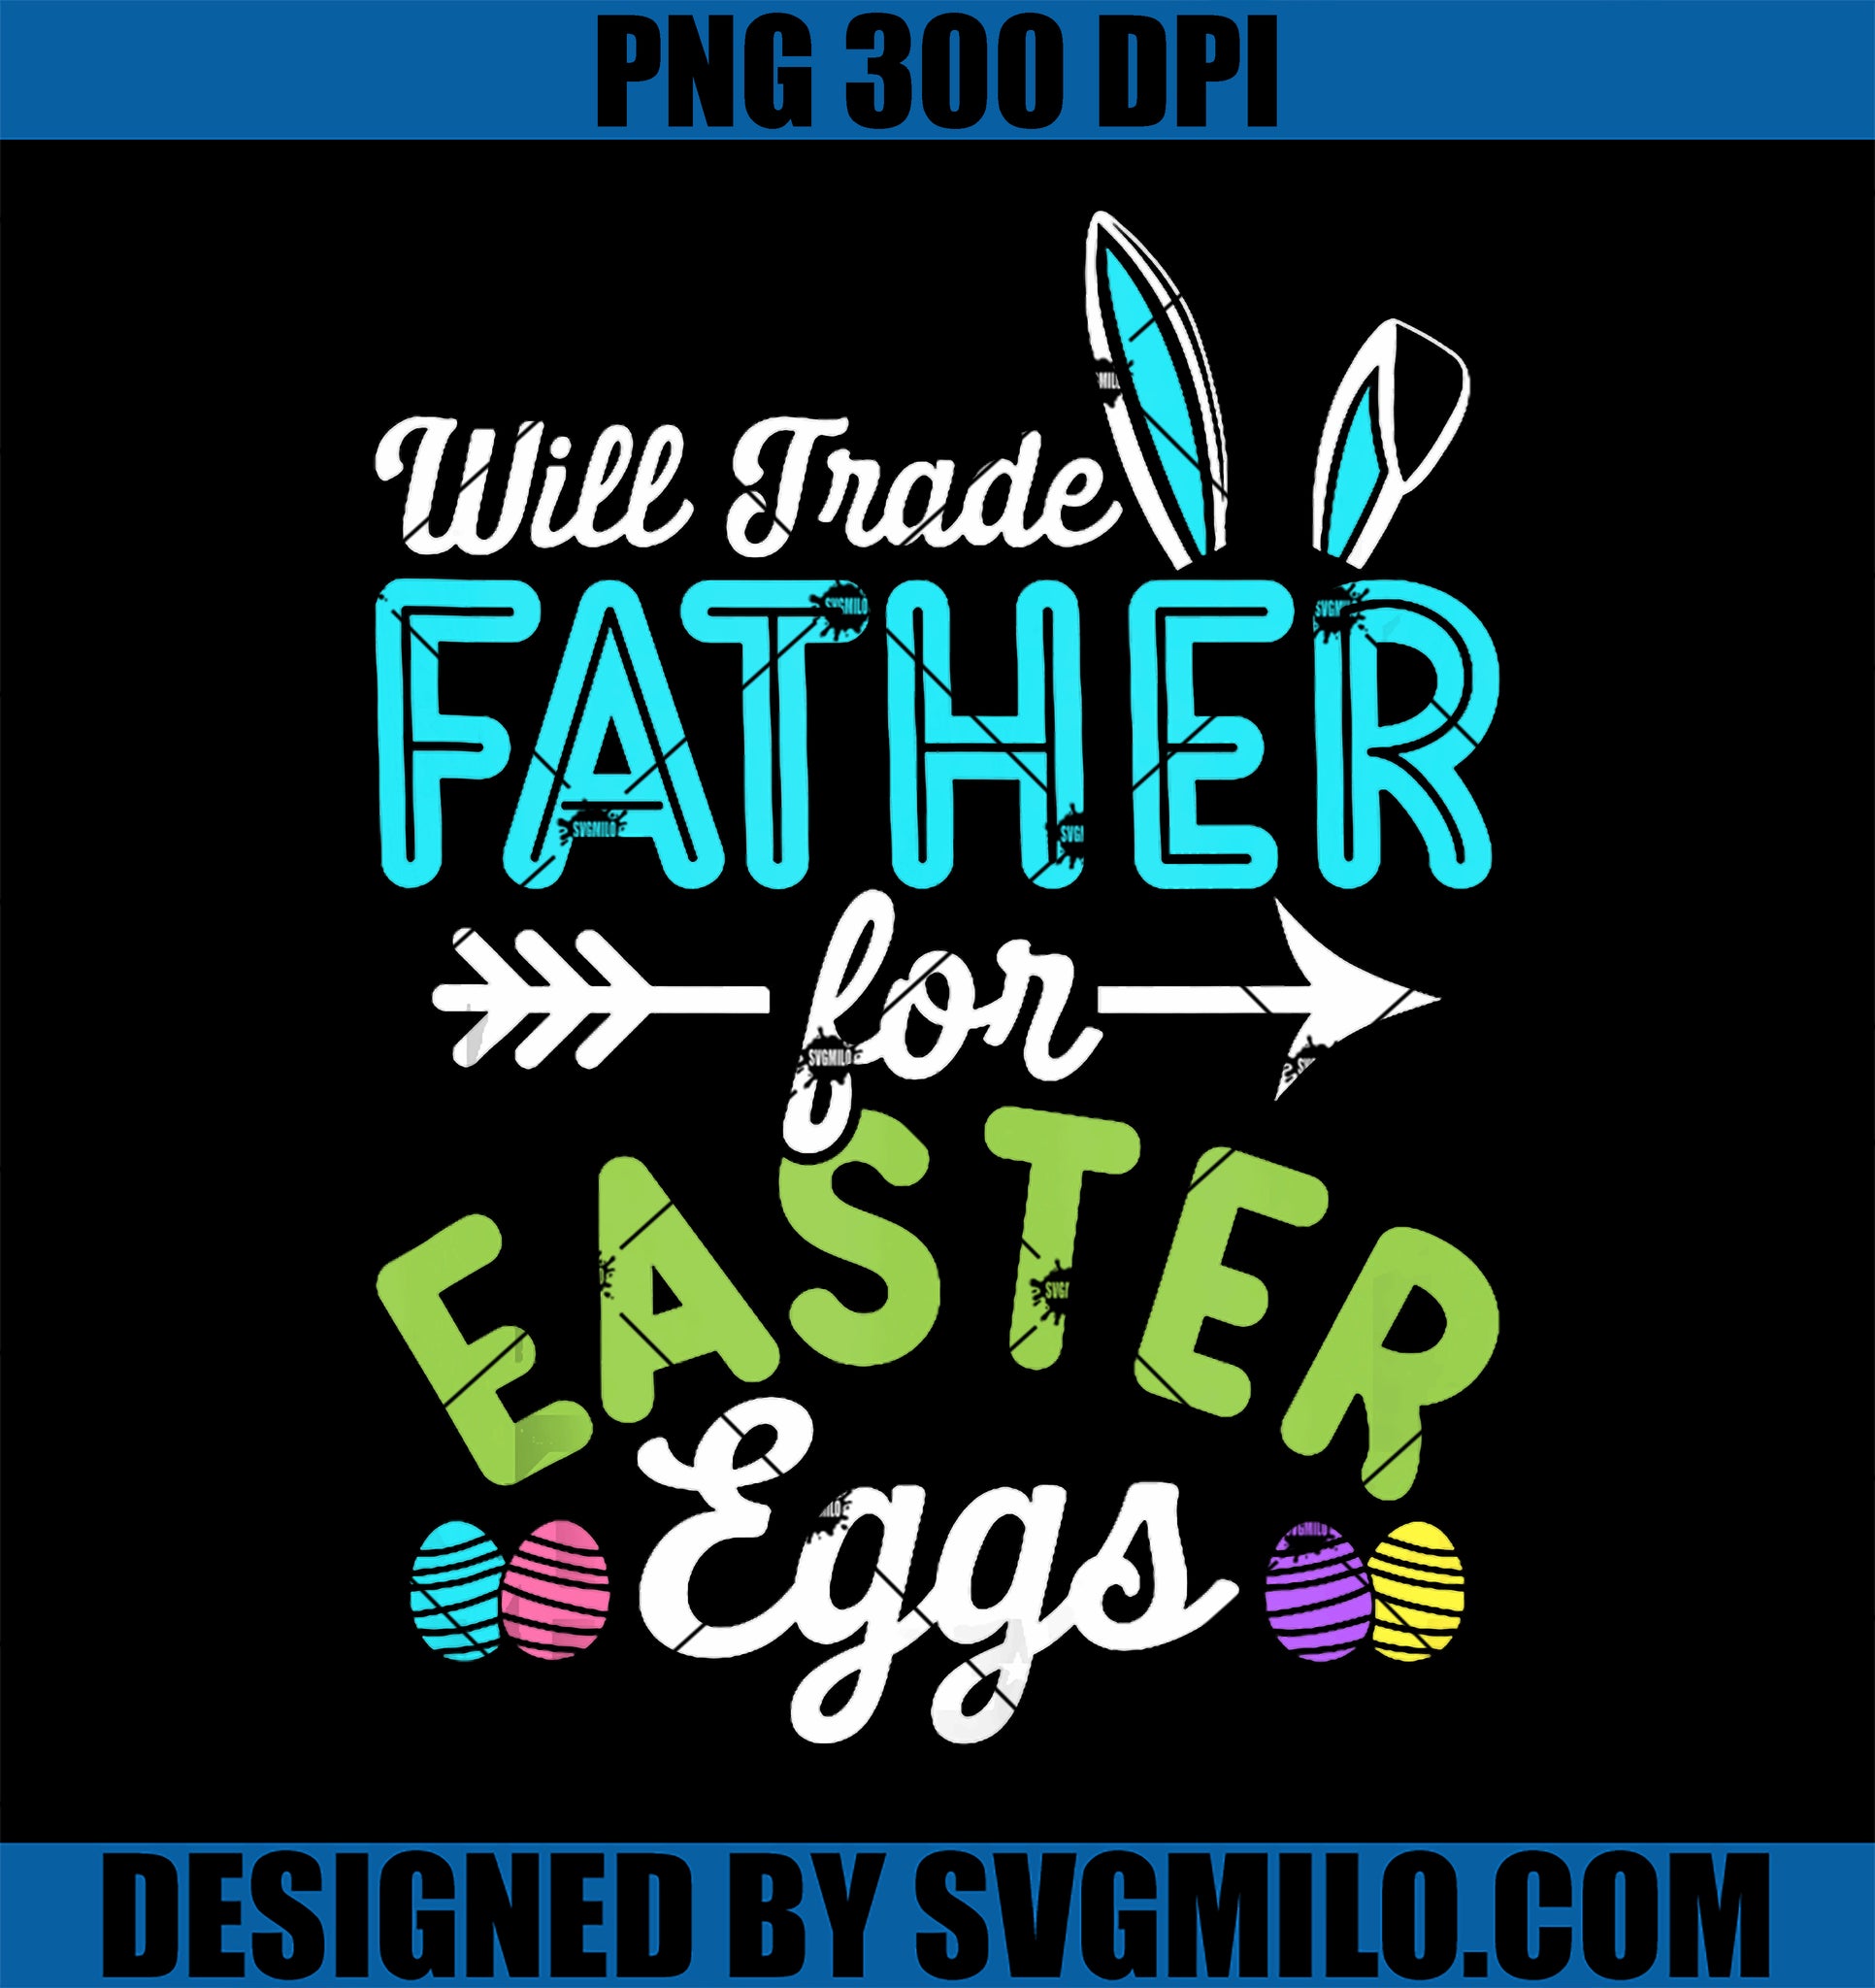 Happy Easter Day PNG, Will Trade Father For Easter Eggs PNG